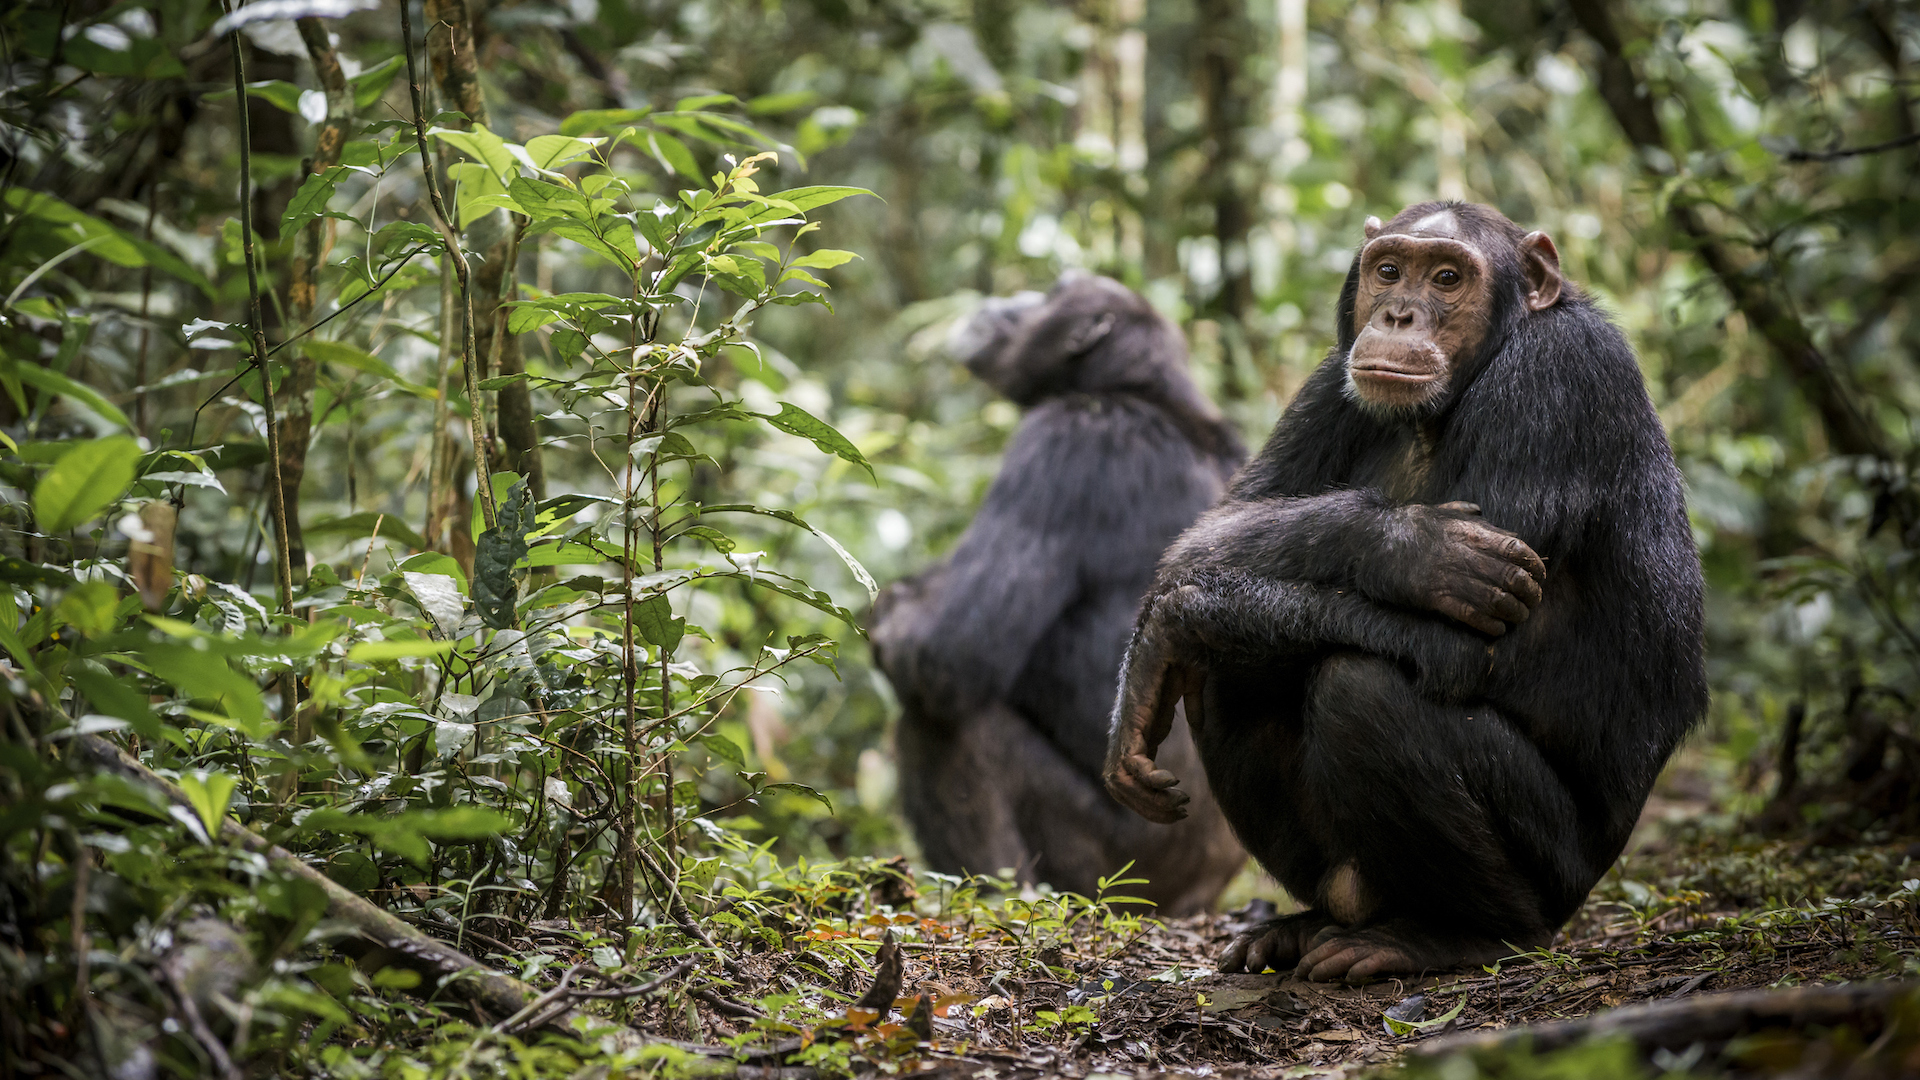 A photograph of two chimpanzees sitting in the forest.